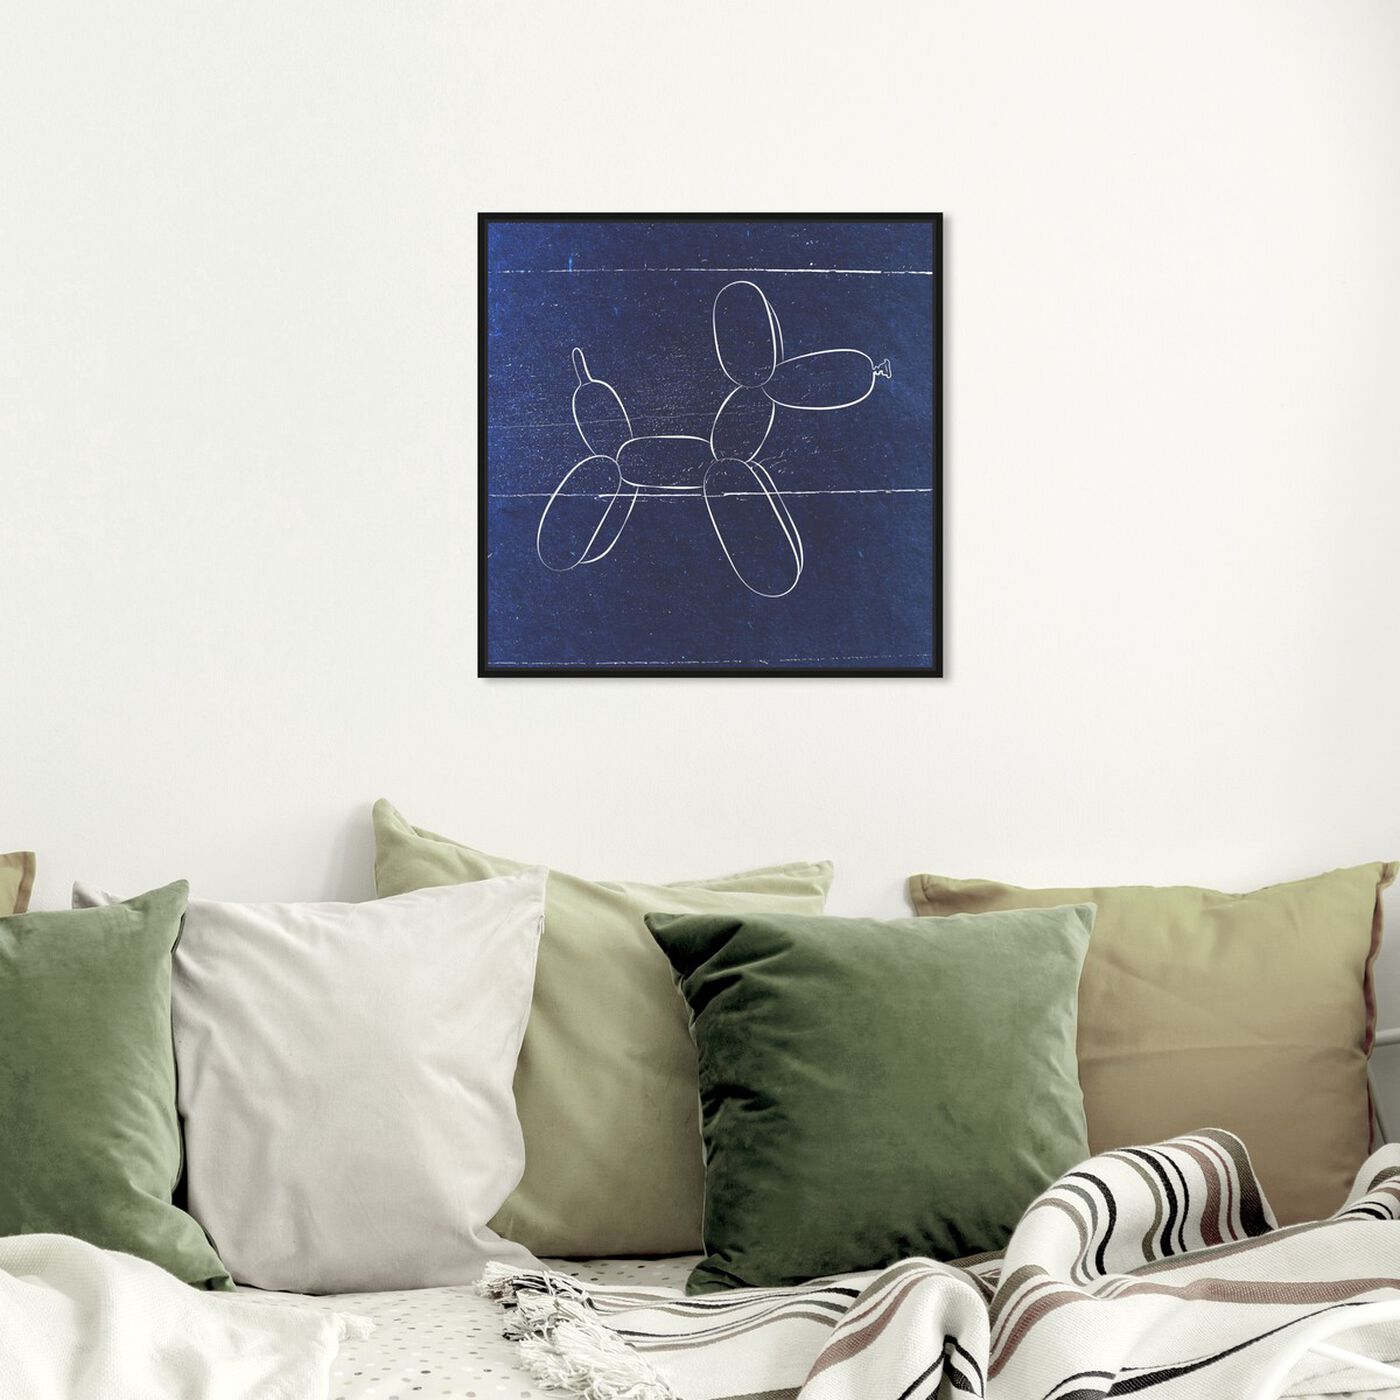 Hanging view of Balloon Dog Blueprint featuring animals and dogs and puppies art.